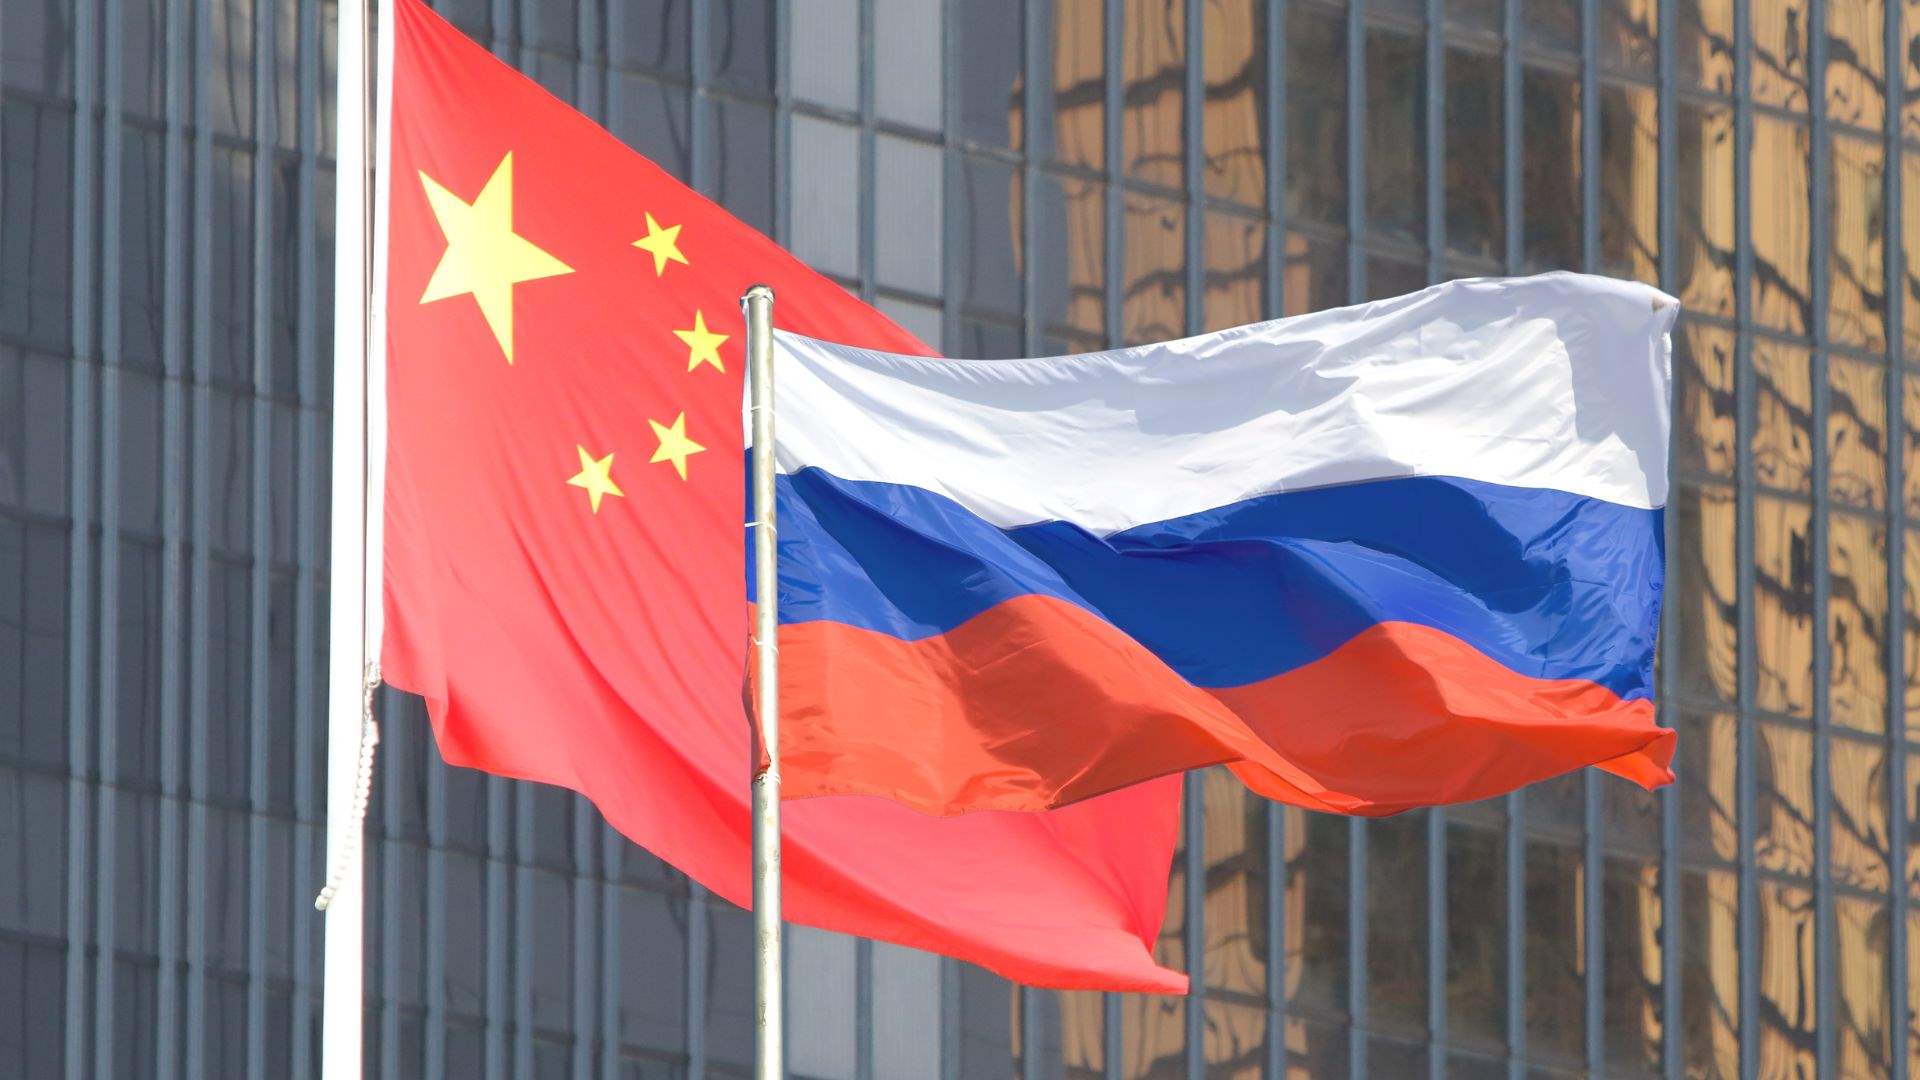 Russia and China kick off live-fire naval exercises in South China Sea